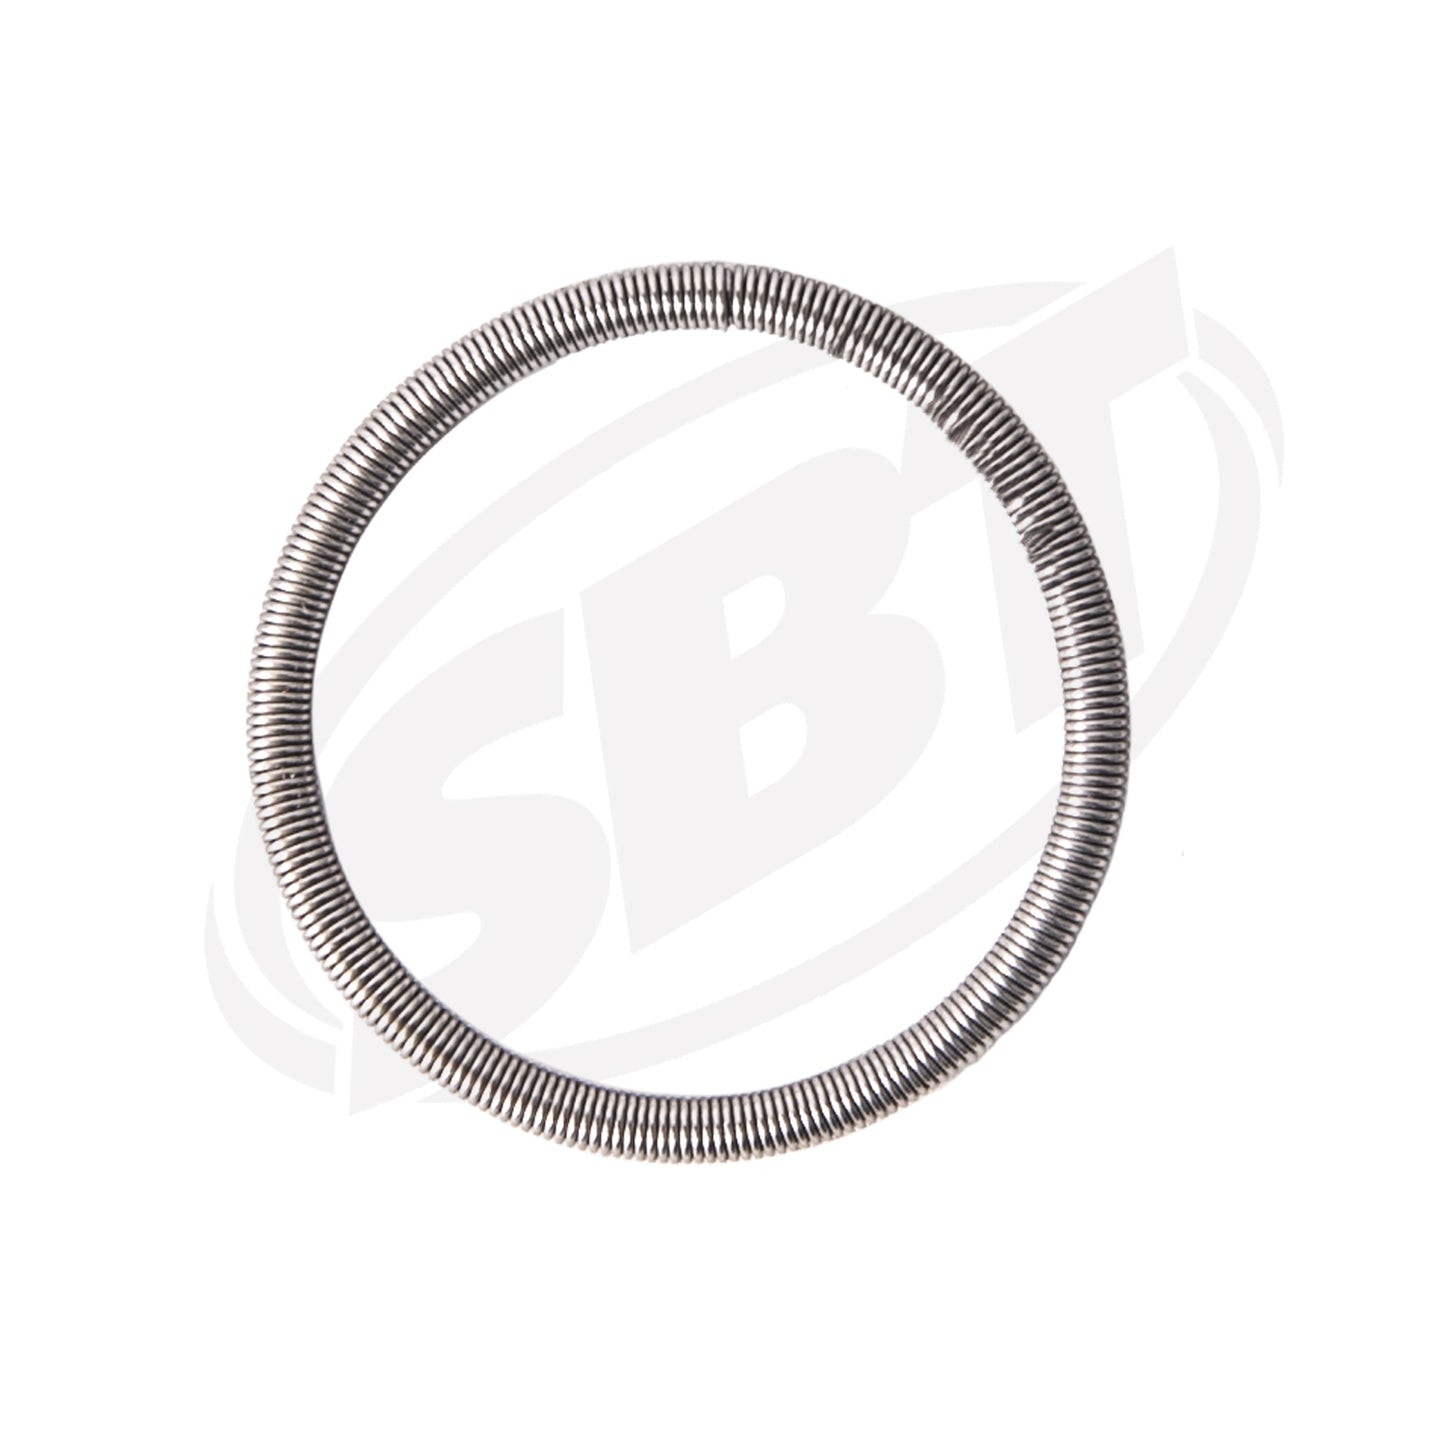 SBT Small Rave Bellow retention spring for SD 787 & 951 & Aftermarket Powervalve Motors